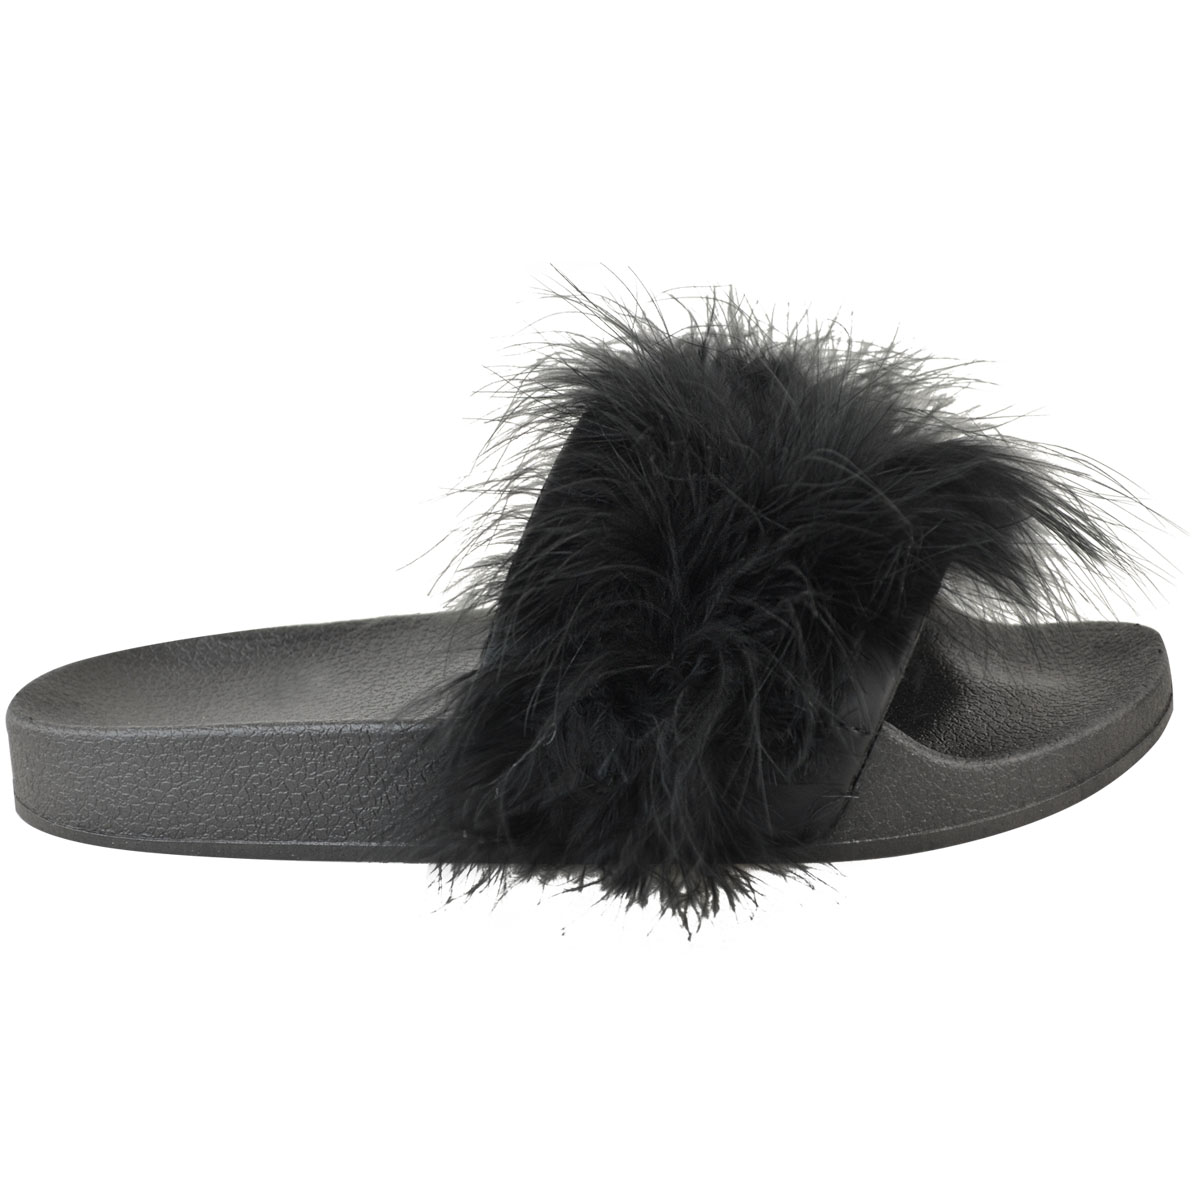 Womens Fluffy Feather Faux Fur Sliders Slides Casual Slip Mules Slippers Sandals 